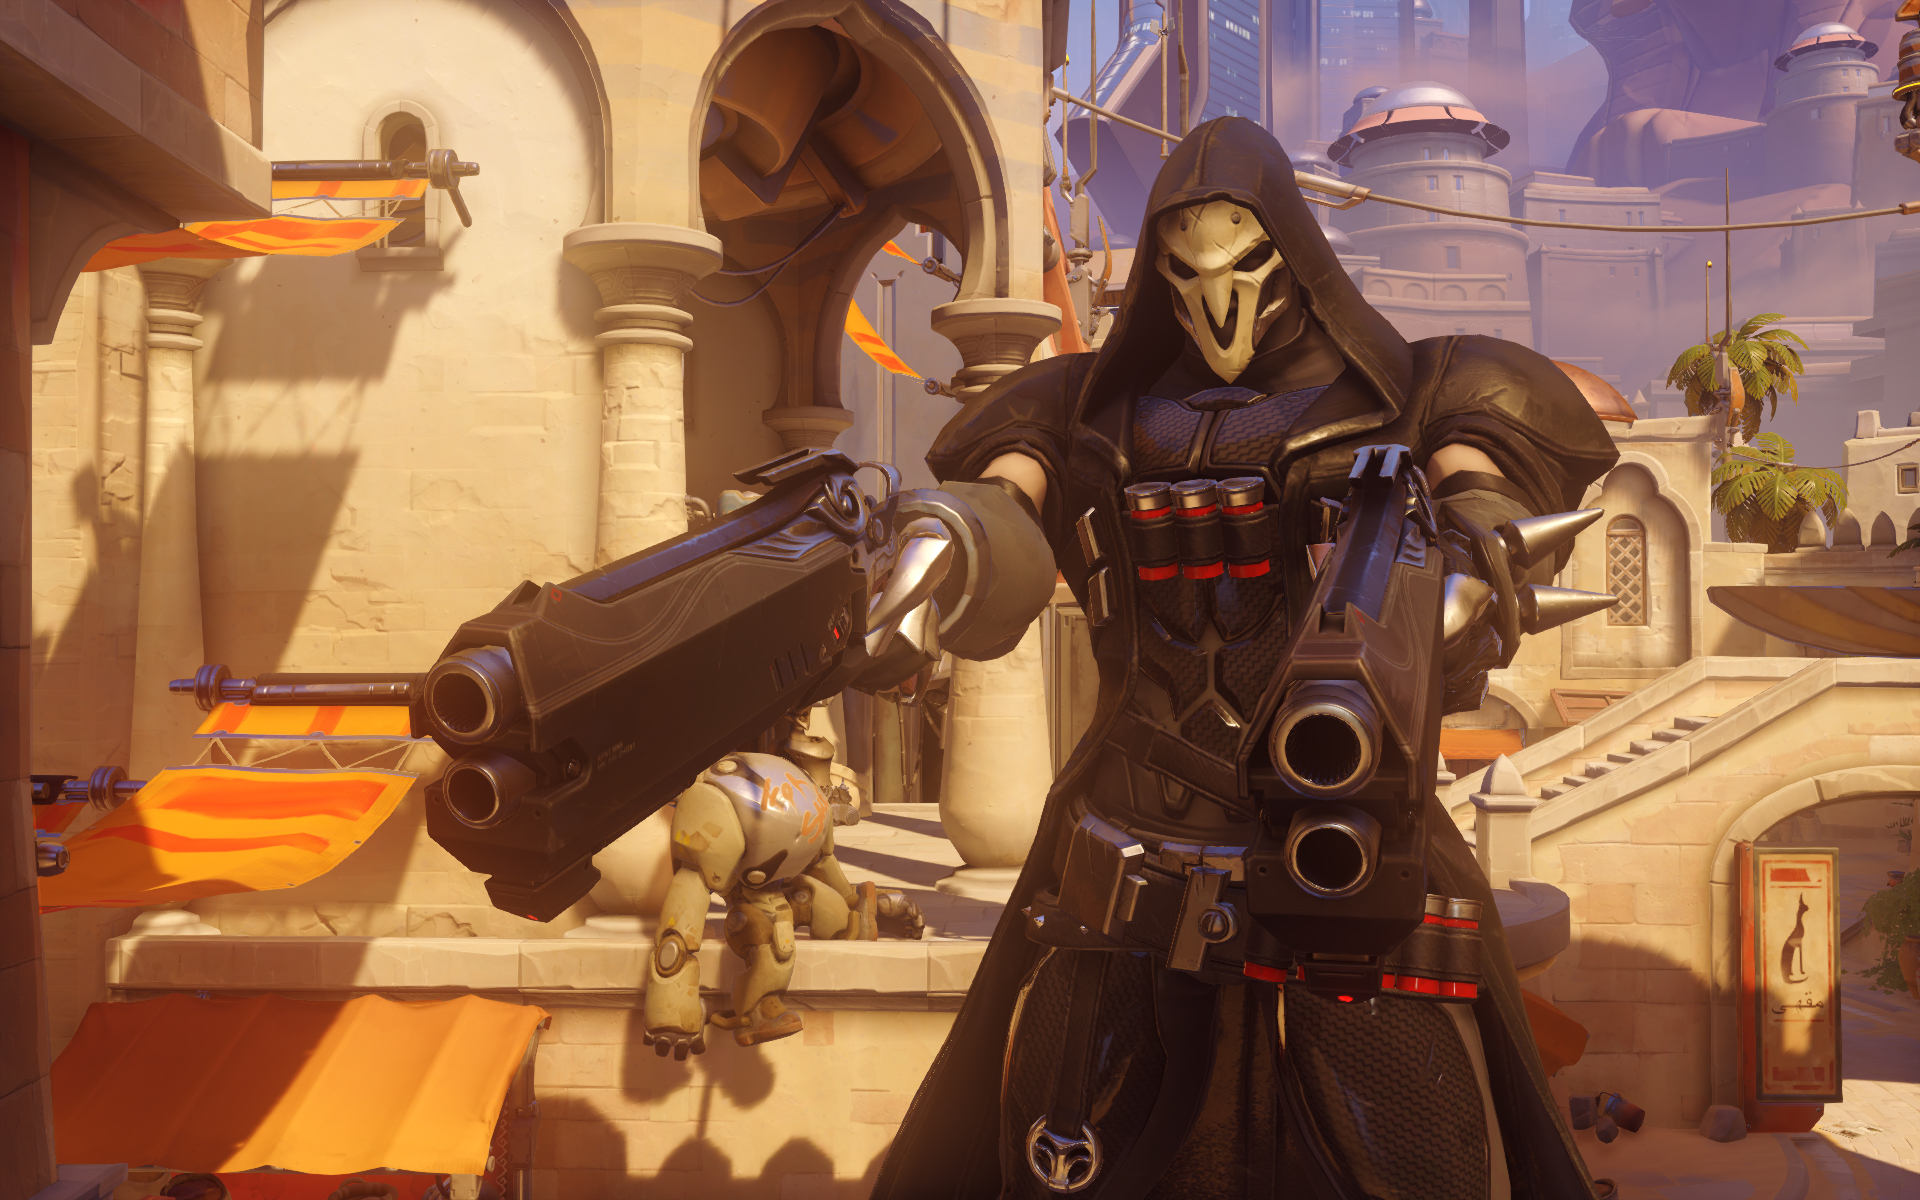 Overwatch’s Competitive Mode Is At Odds With The Rest Of The Game